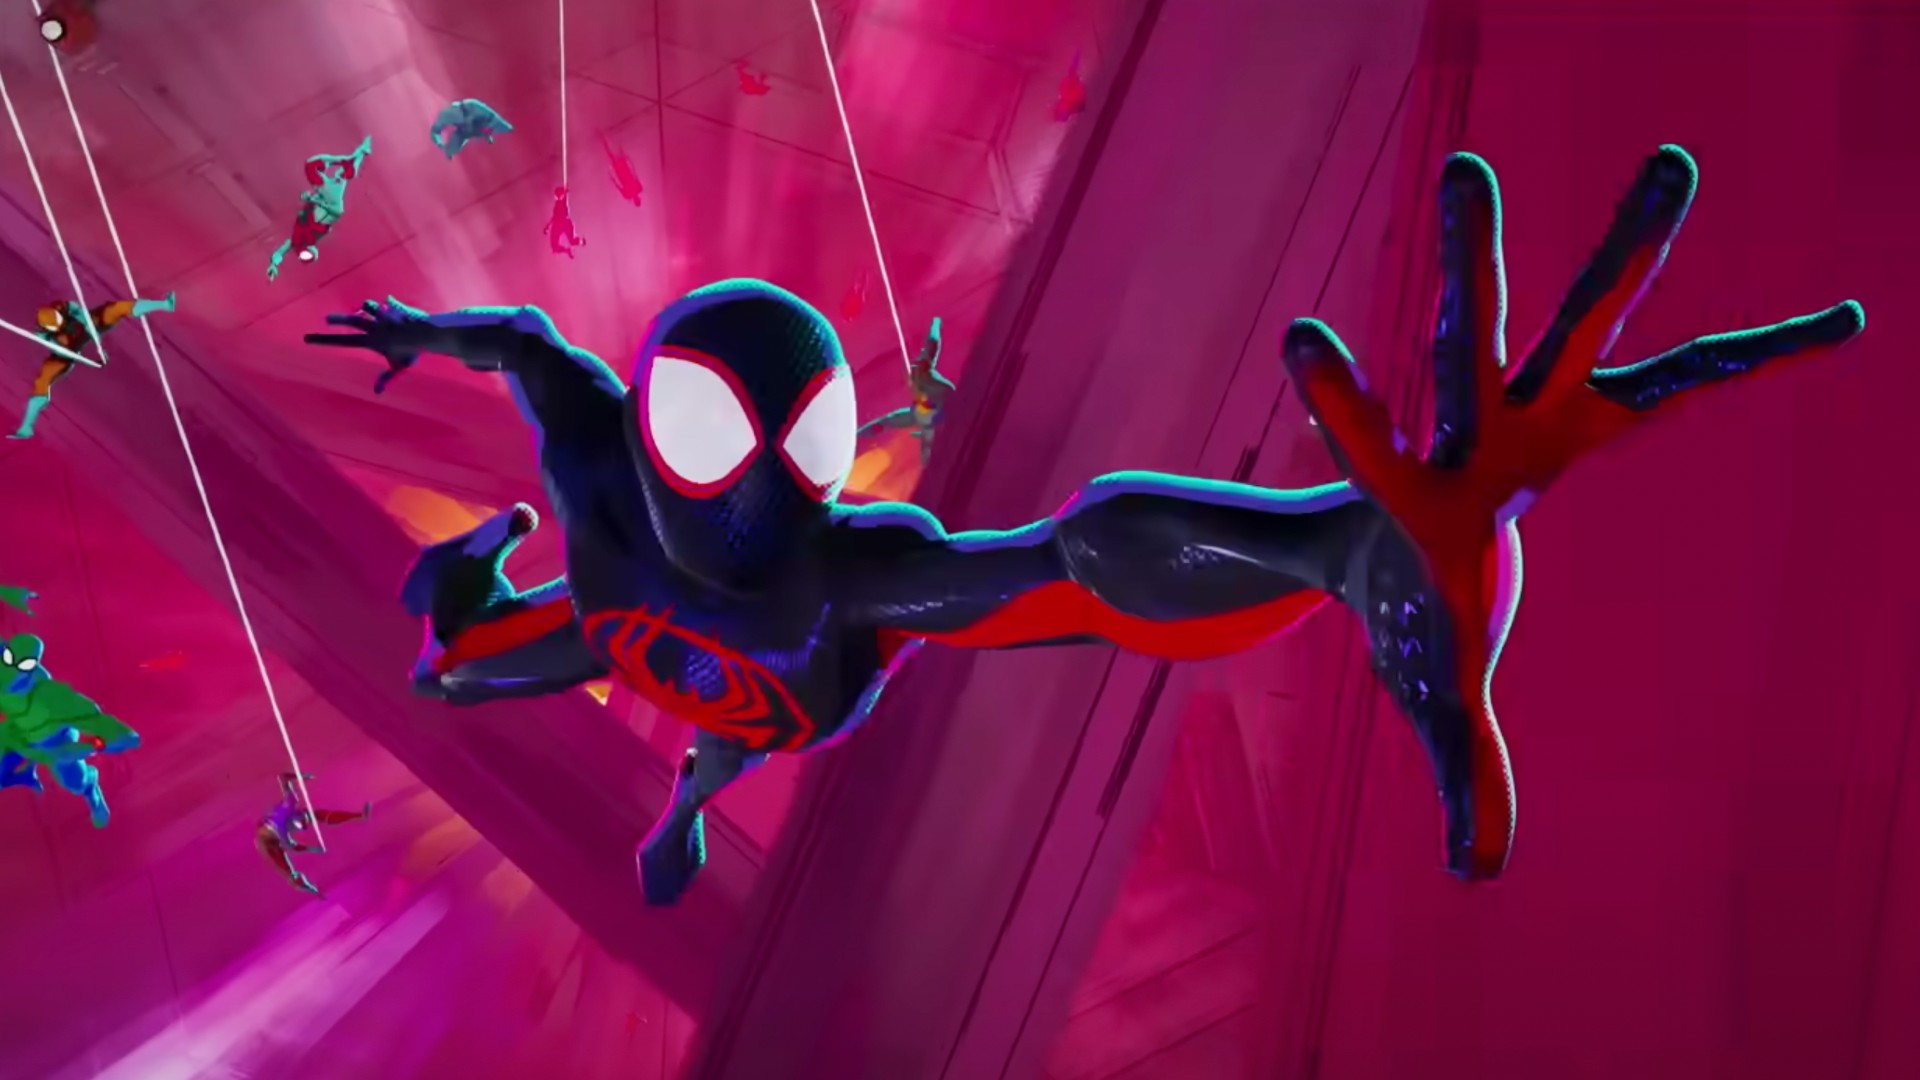 Spider-Man: Across the Spider-Verse Scary for Kids? Movie Review